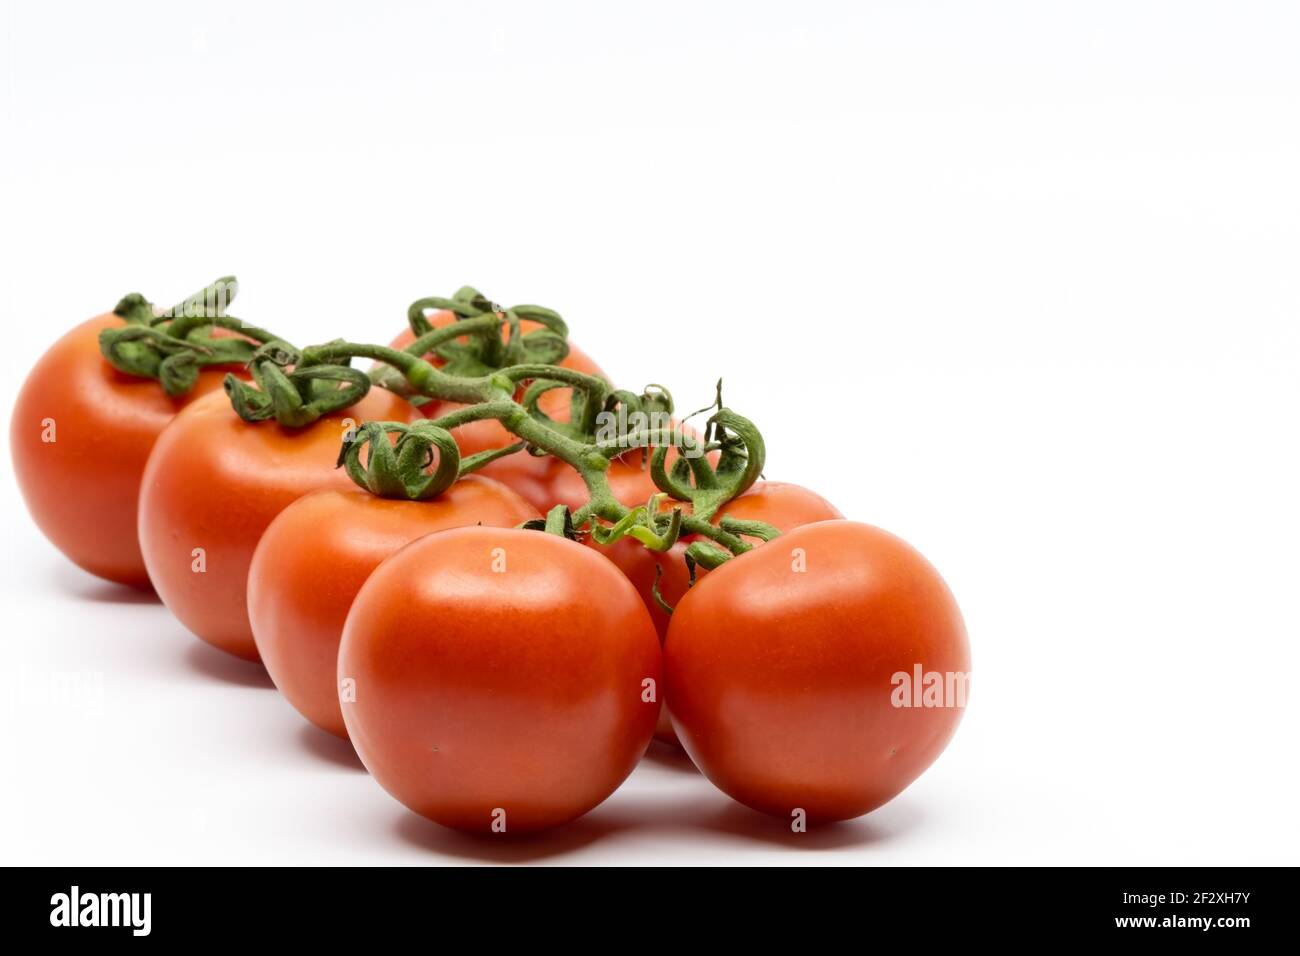 Fresh Tomatoes Isolated on White Background. Bunch of Fresh, Red Tomatoes with Green Stems Stock Photo